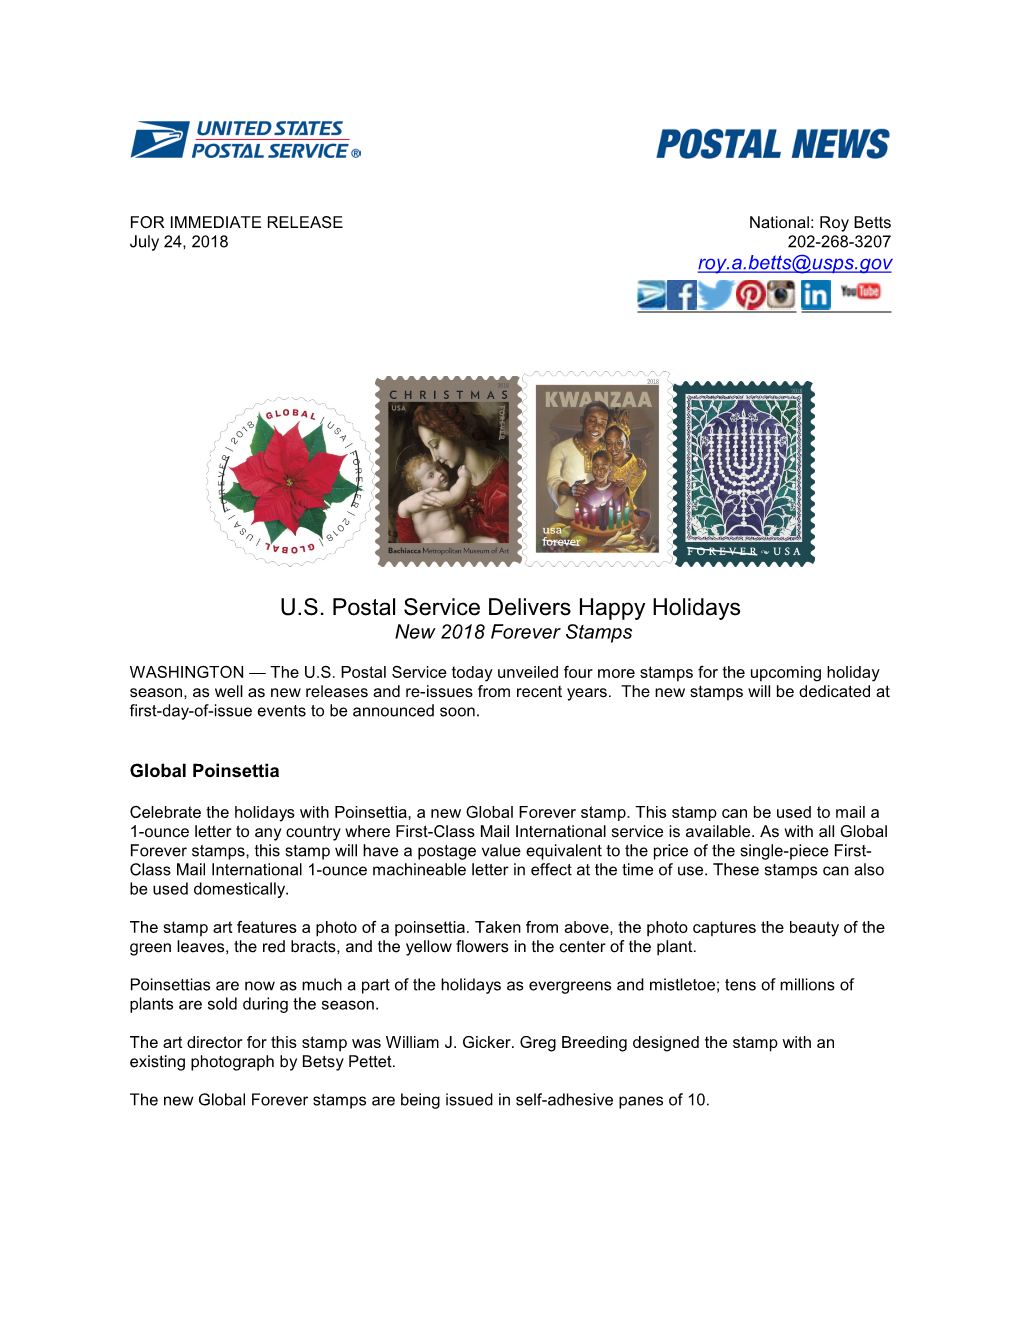 U.S. Postal Service Delivers Happy Holidays New 2018 Forever Stamps